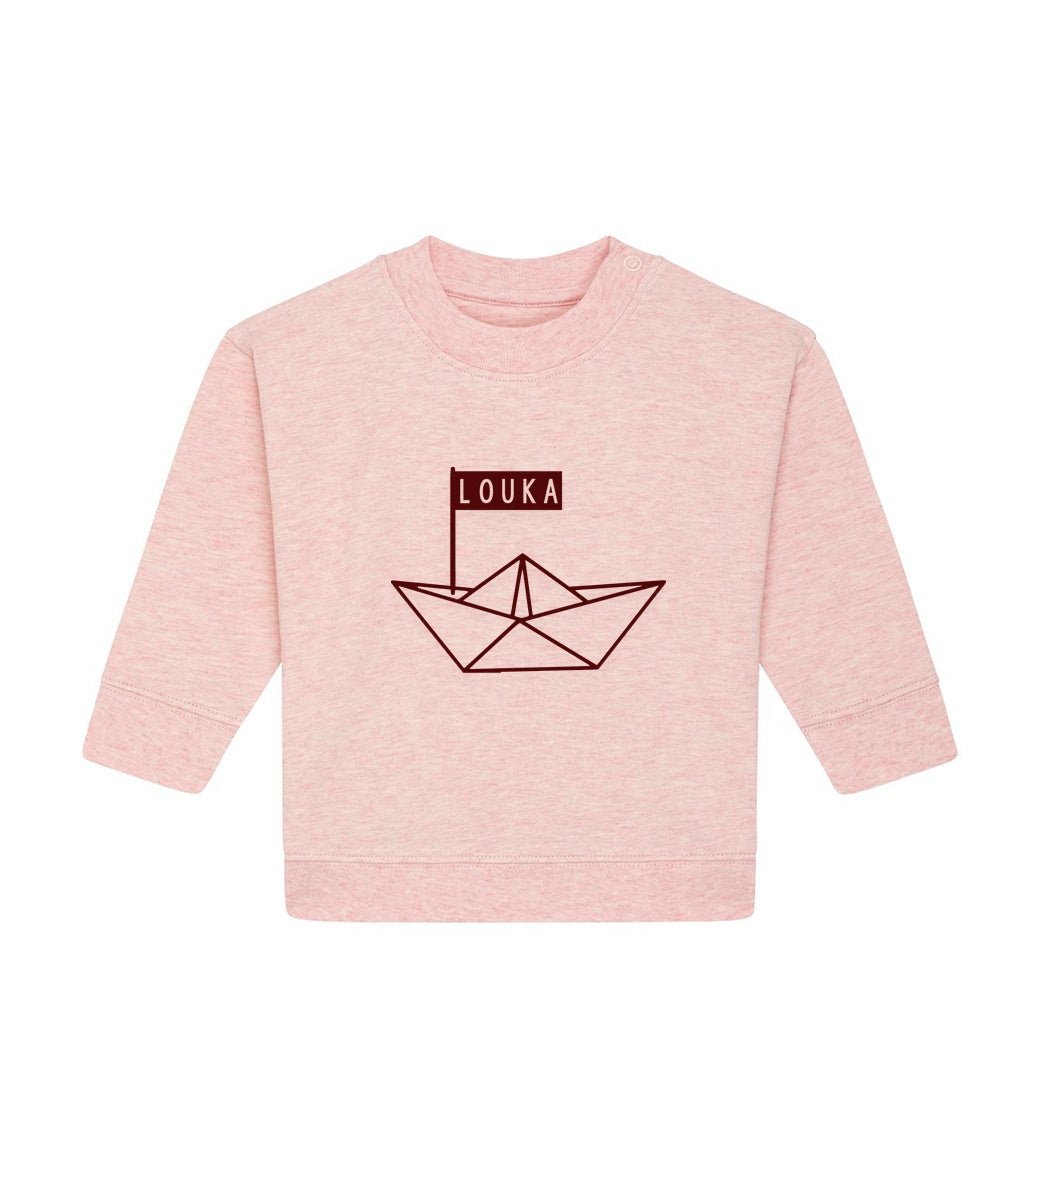 Organic baby sweater // Origami boat - with name